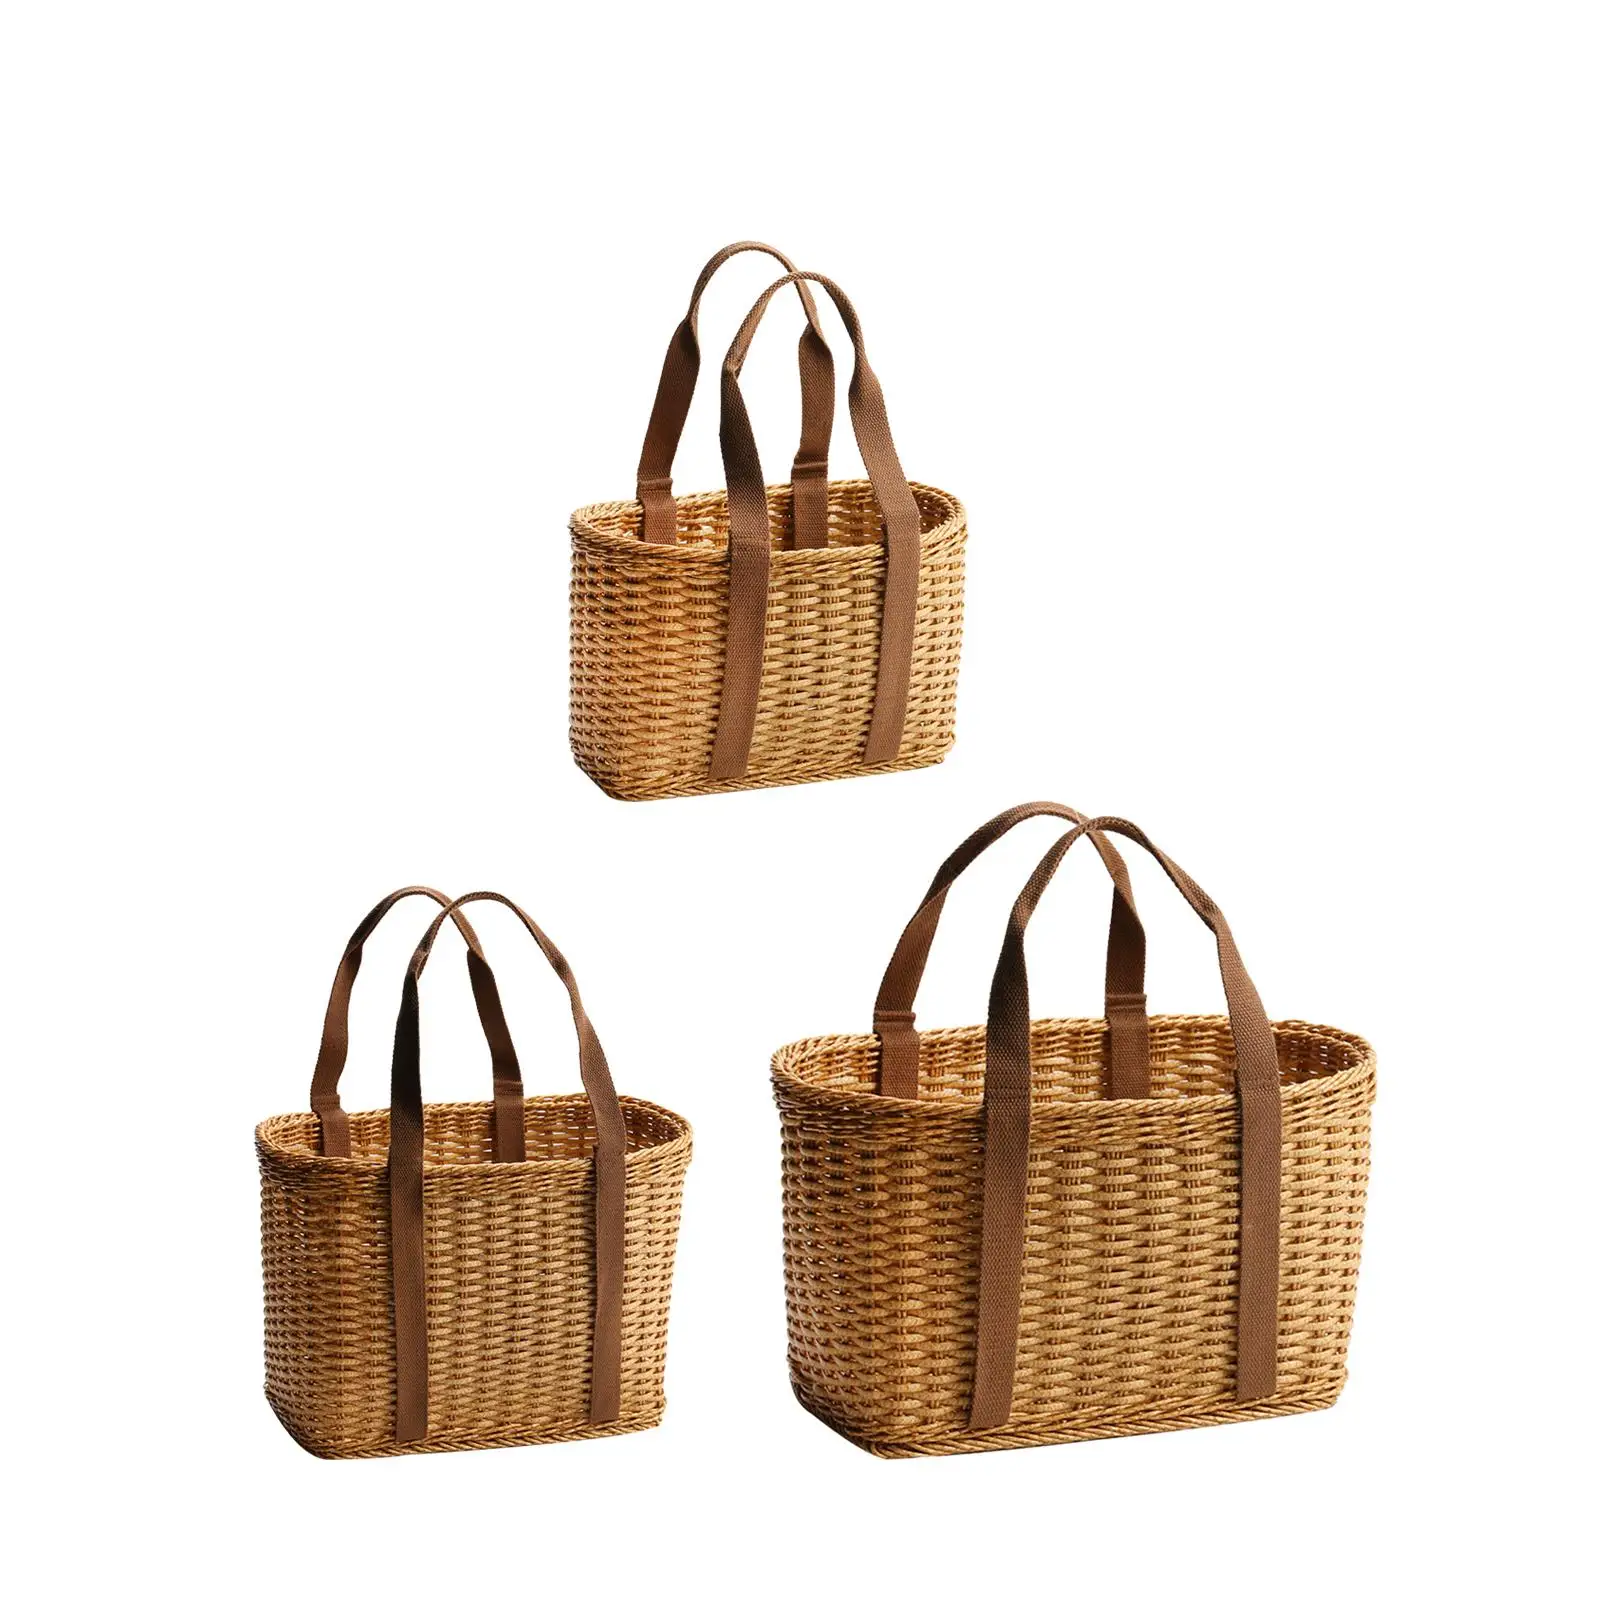 Woven Basket Stylish Durable with Handles Practical Handmade Picnic Baskets for Gardening Daily Necessities Camping